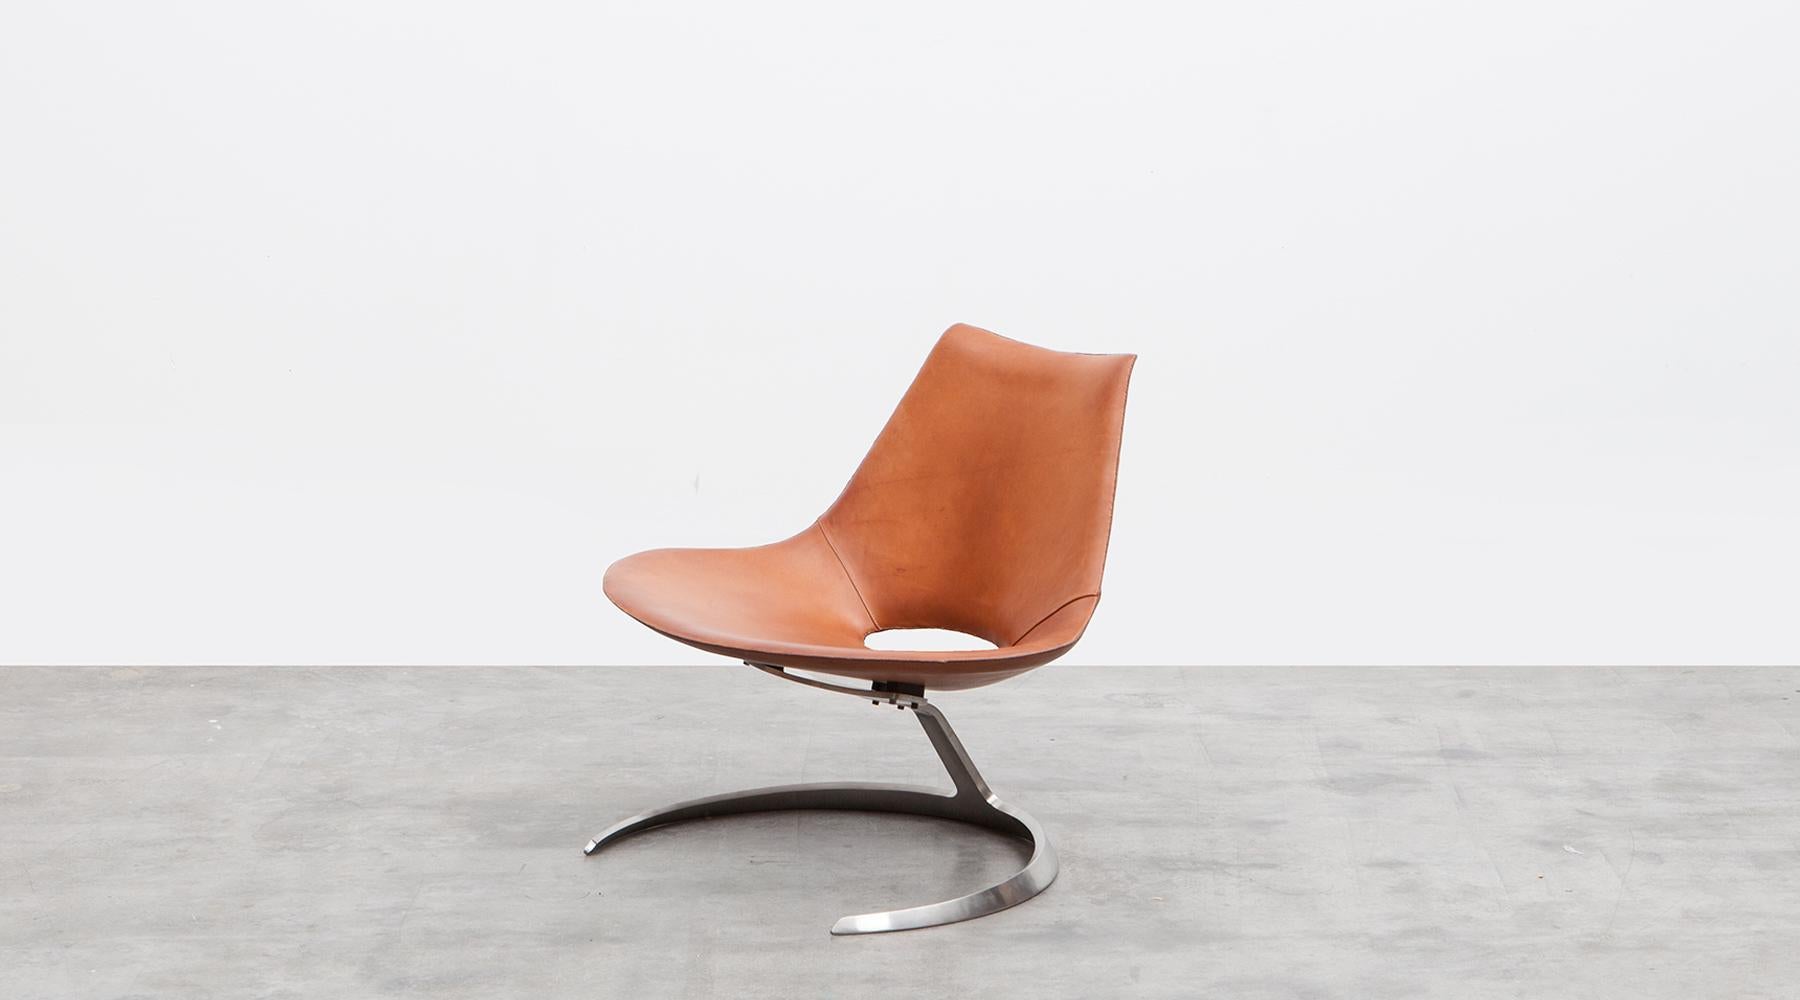 Brown leather shell on chromium plated steel base by Fabricius / Kastholm, Denmark, 1962.

1960s Design classic leather scimitar chair by the iconic Danish designer duo Fabricius / Kastholm. The Scimitar chair takes its name and its shape from the